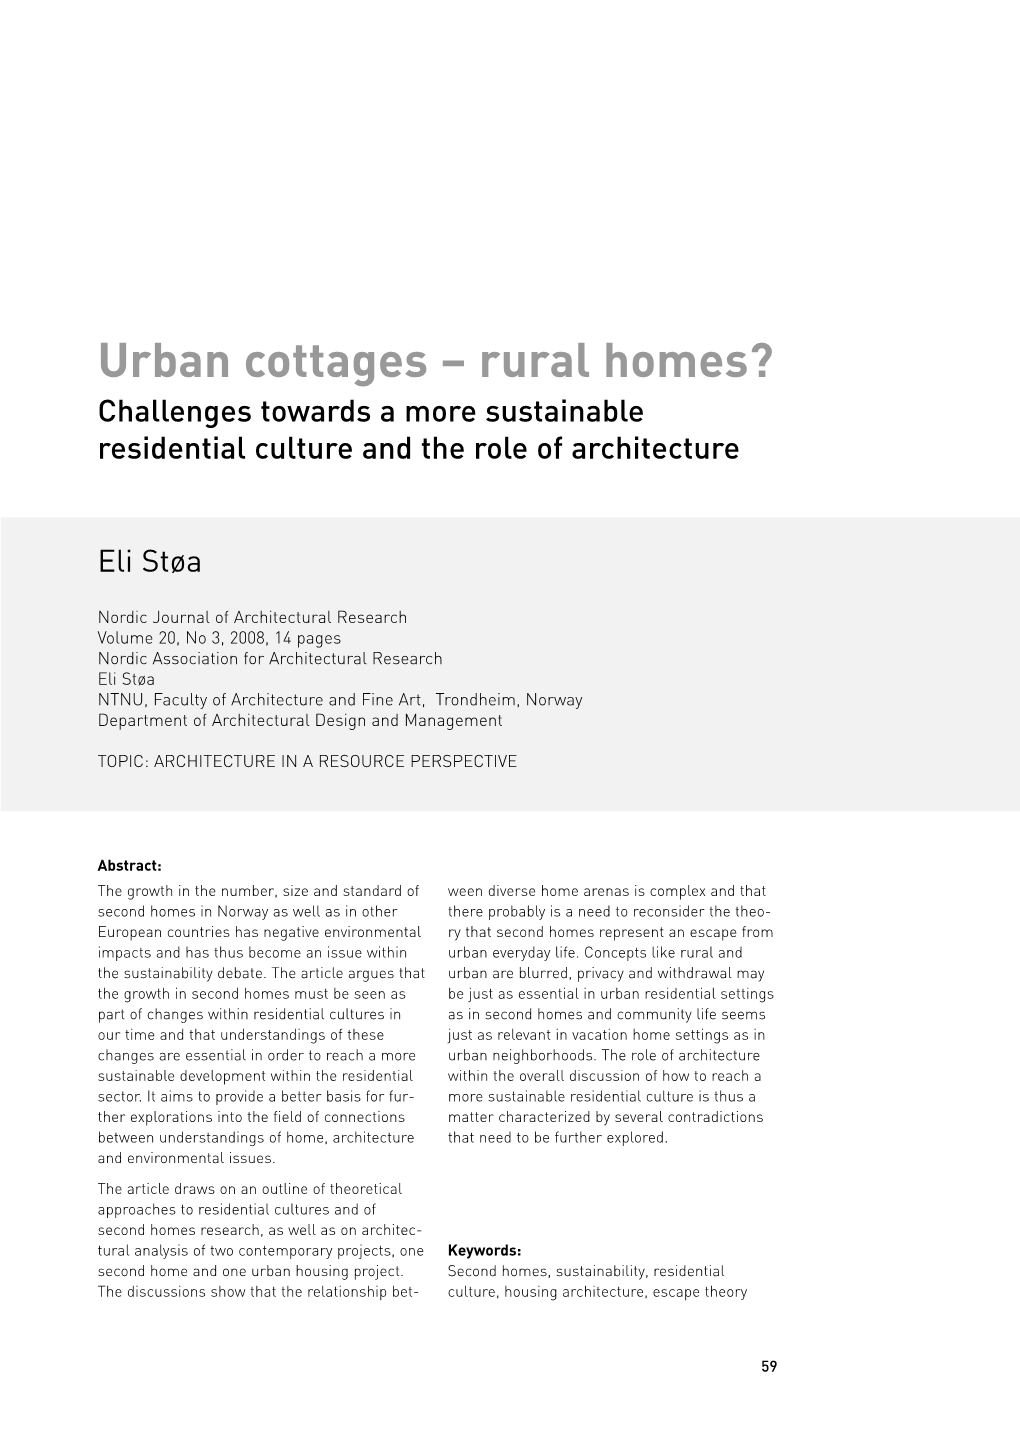 Urban Cottages – Rural Homes? Challenges Towards a More Sustainable Residential Culture and the Role of Architecture